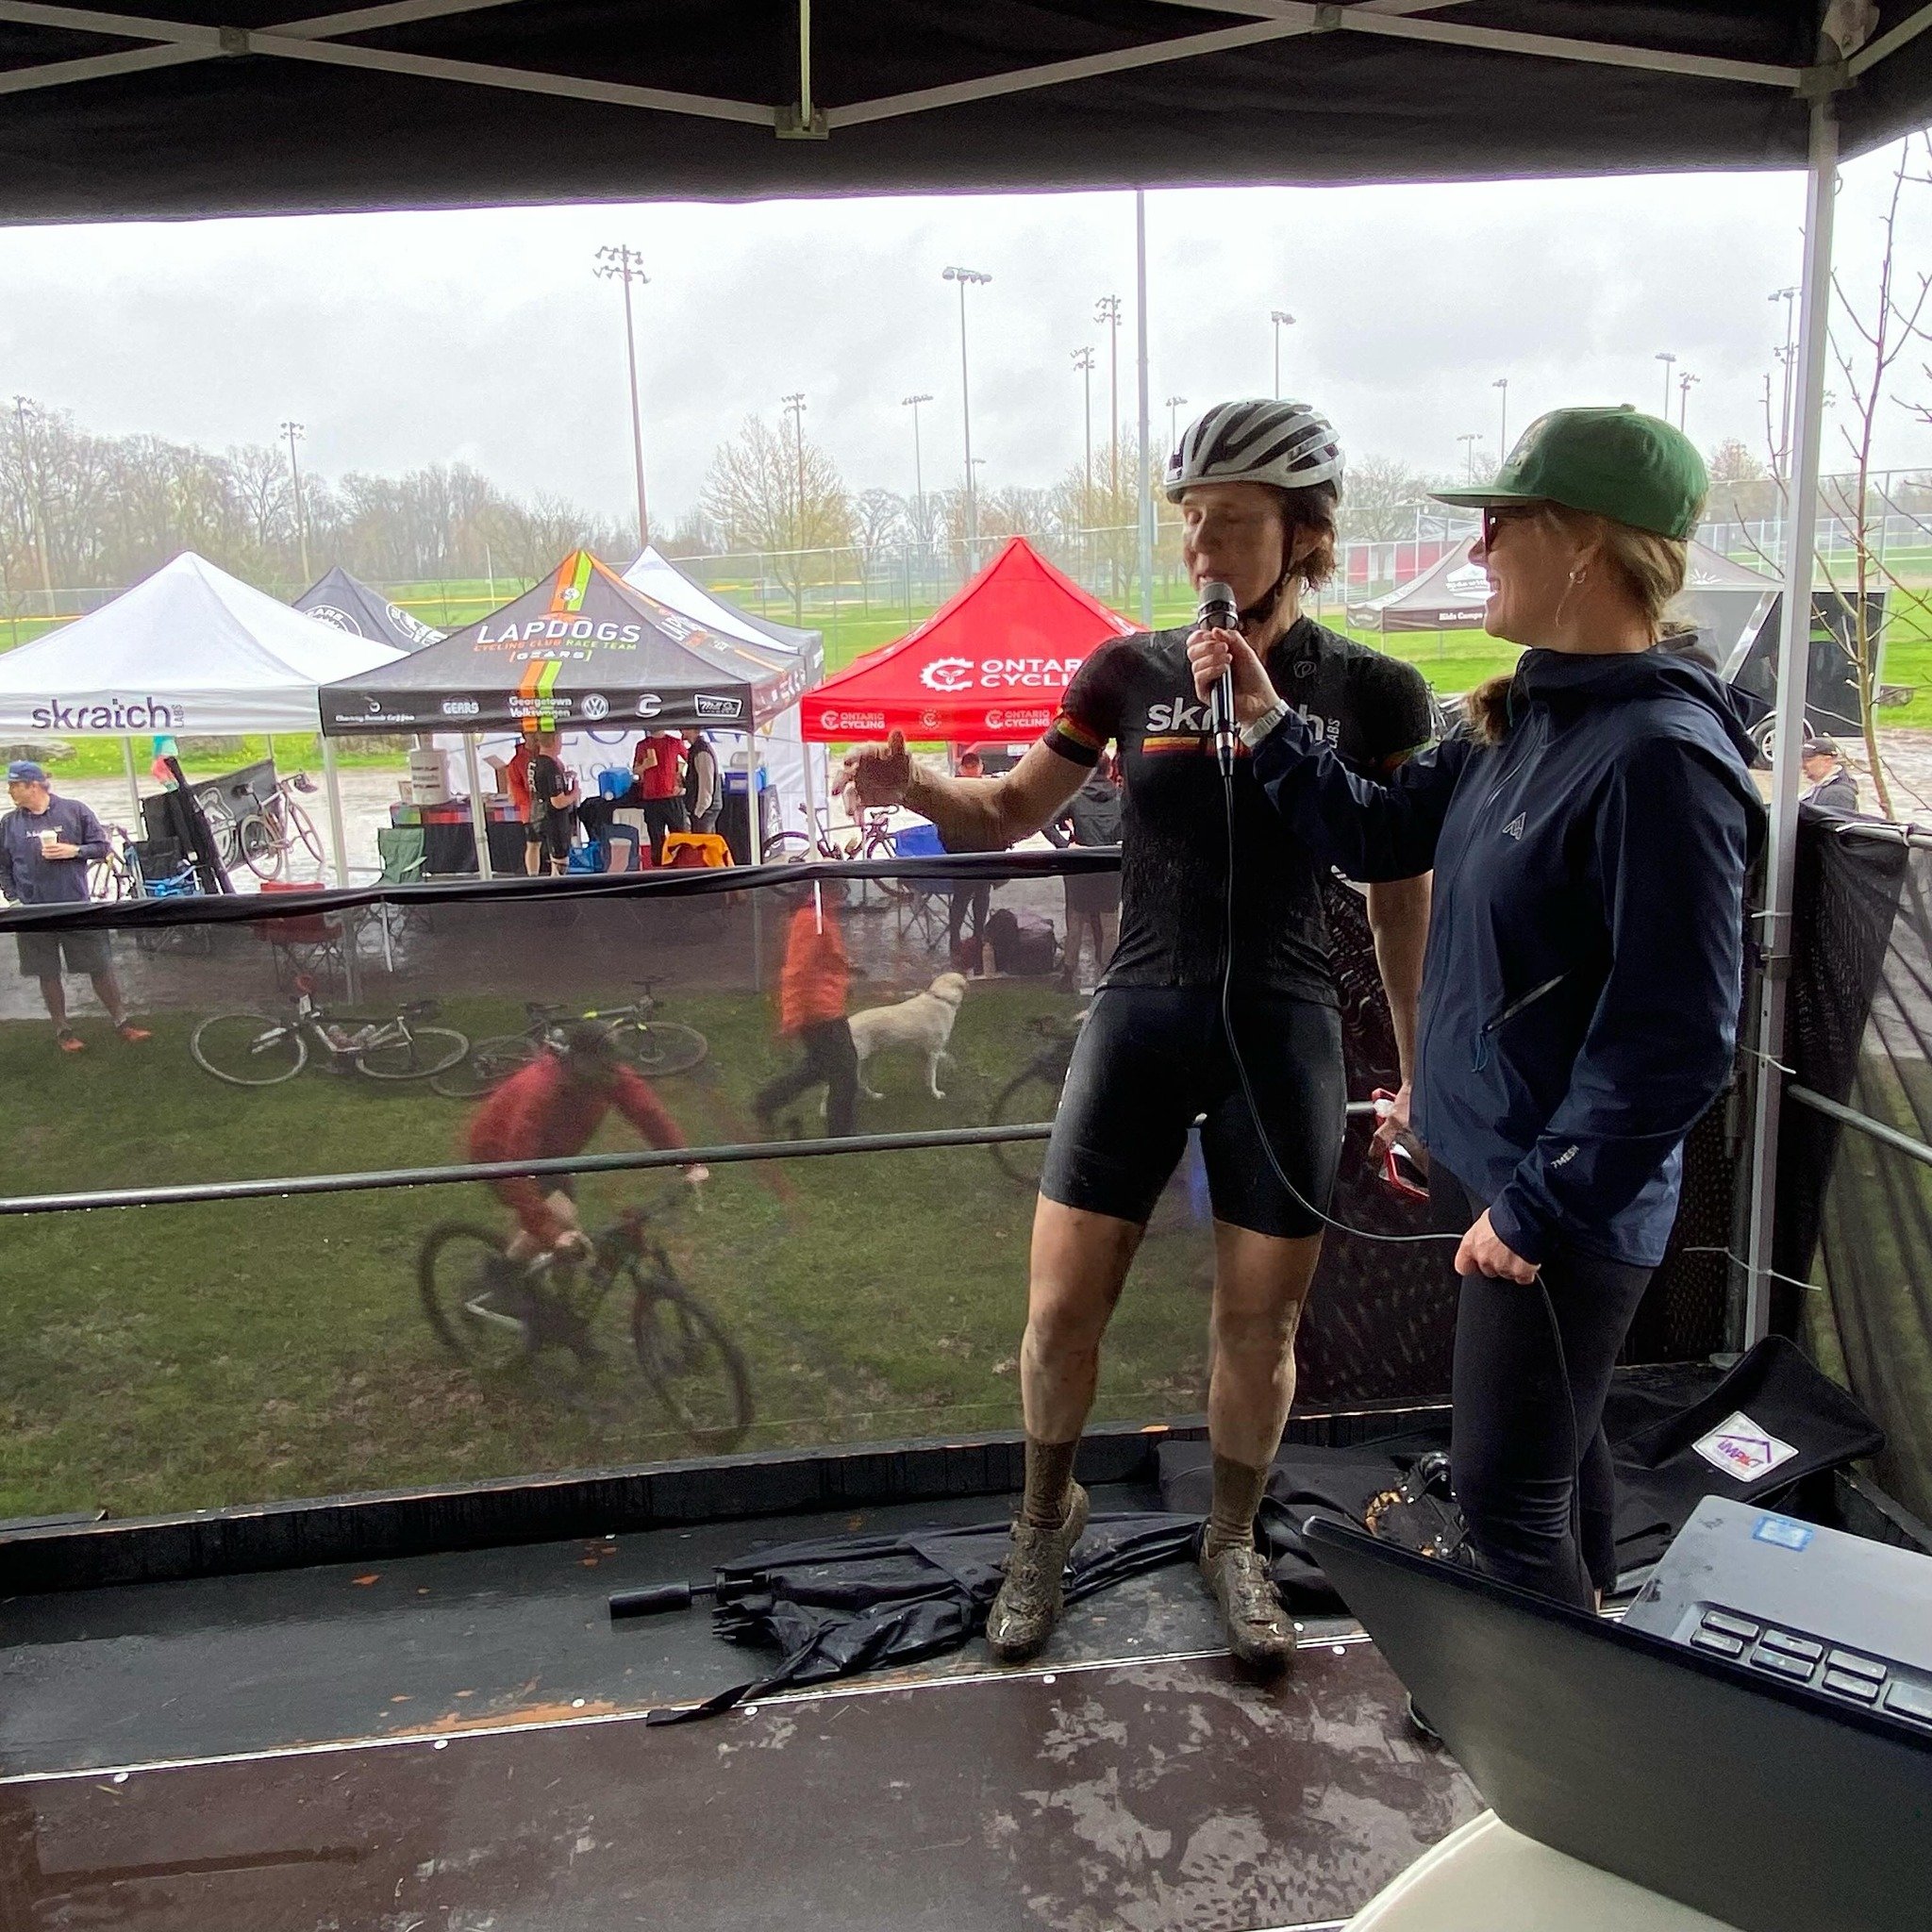 Unofficial results, but it looks like our very own Karen Duff @duff_fit4adventure (our @skratchlabs Rep) has come in on top of the women&rsquo;s masters podium at the @paris2ancaster. Here she is being interviewed.